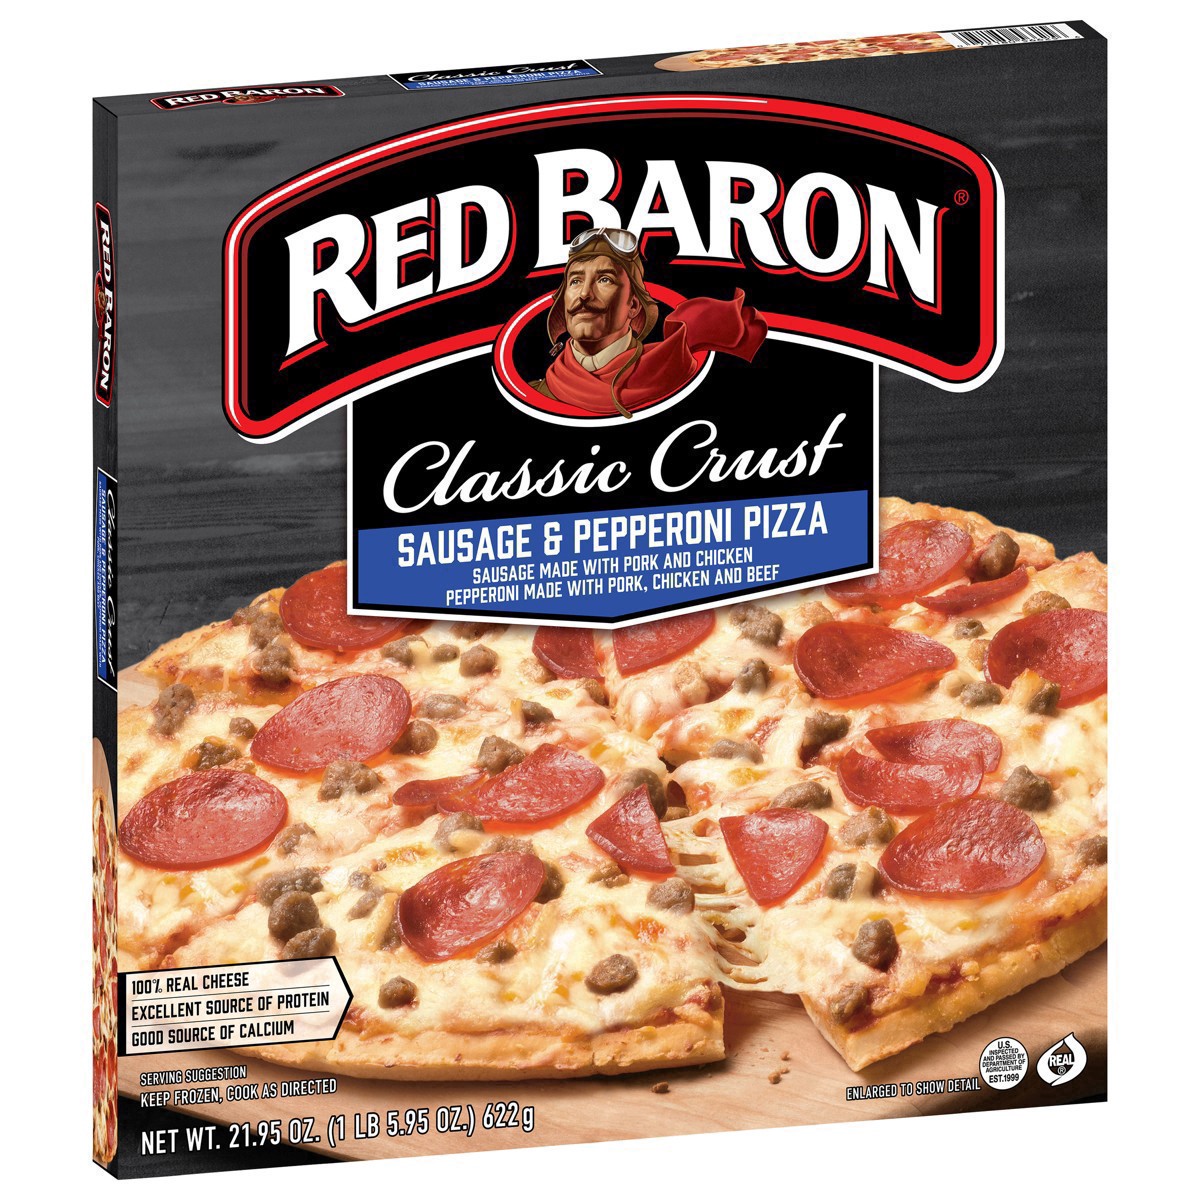 slide 5 of 49, Red Baron Frozen Pizza Classic Crust Sausage & Pepperoni, 21.95 oz